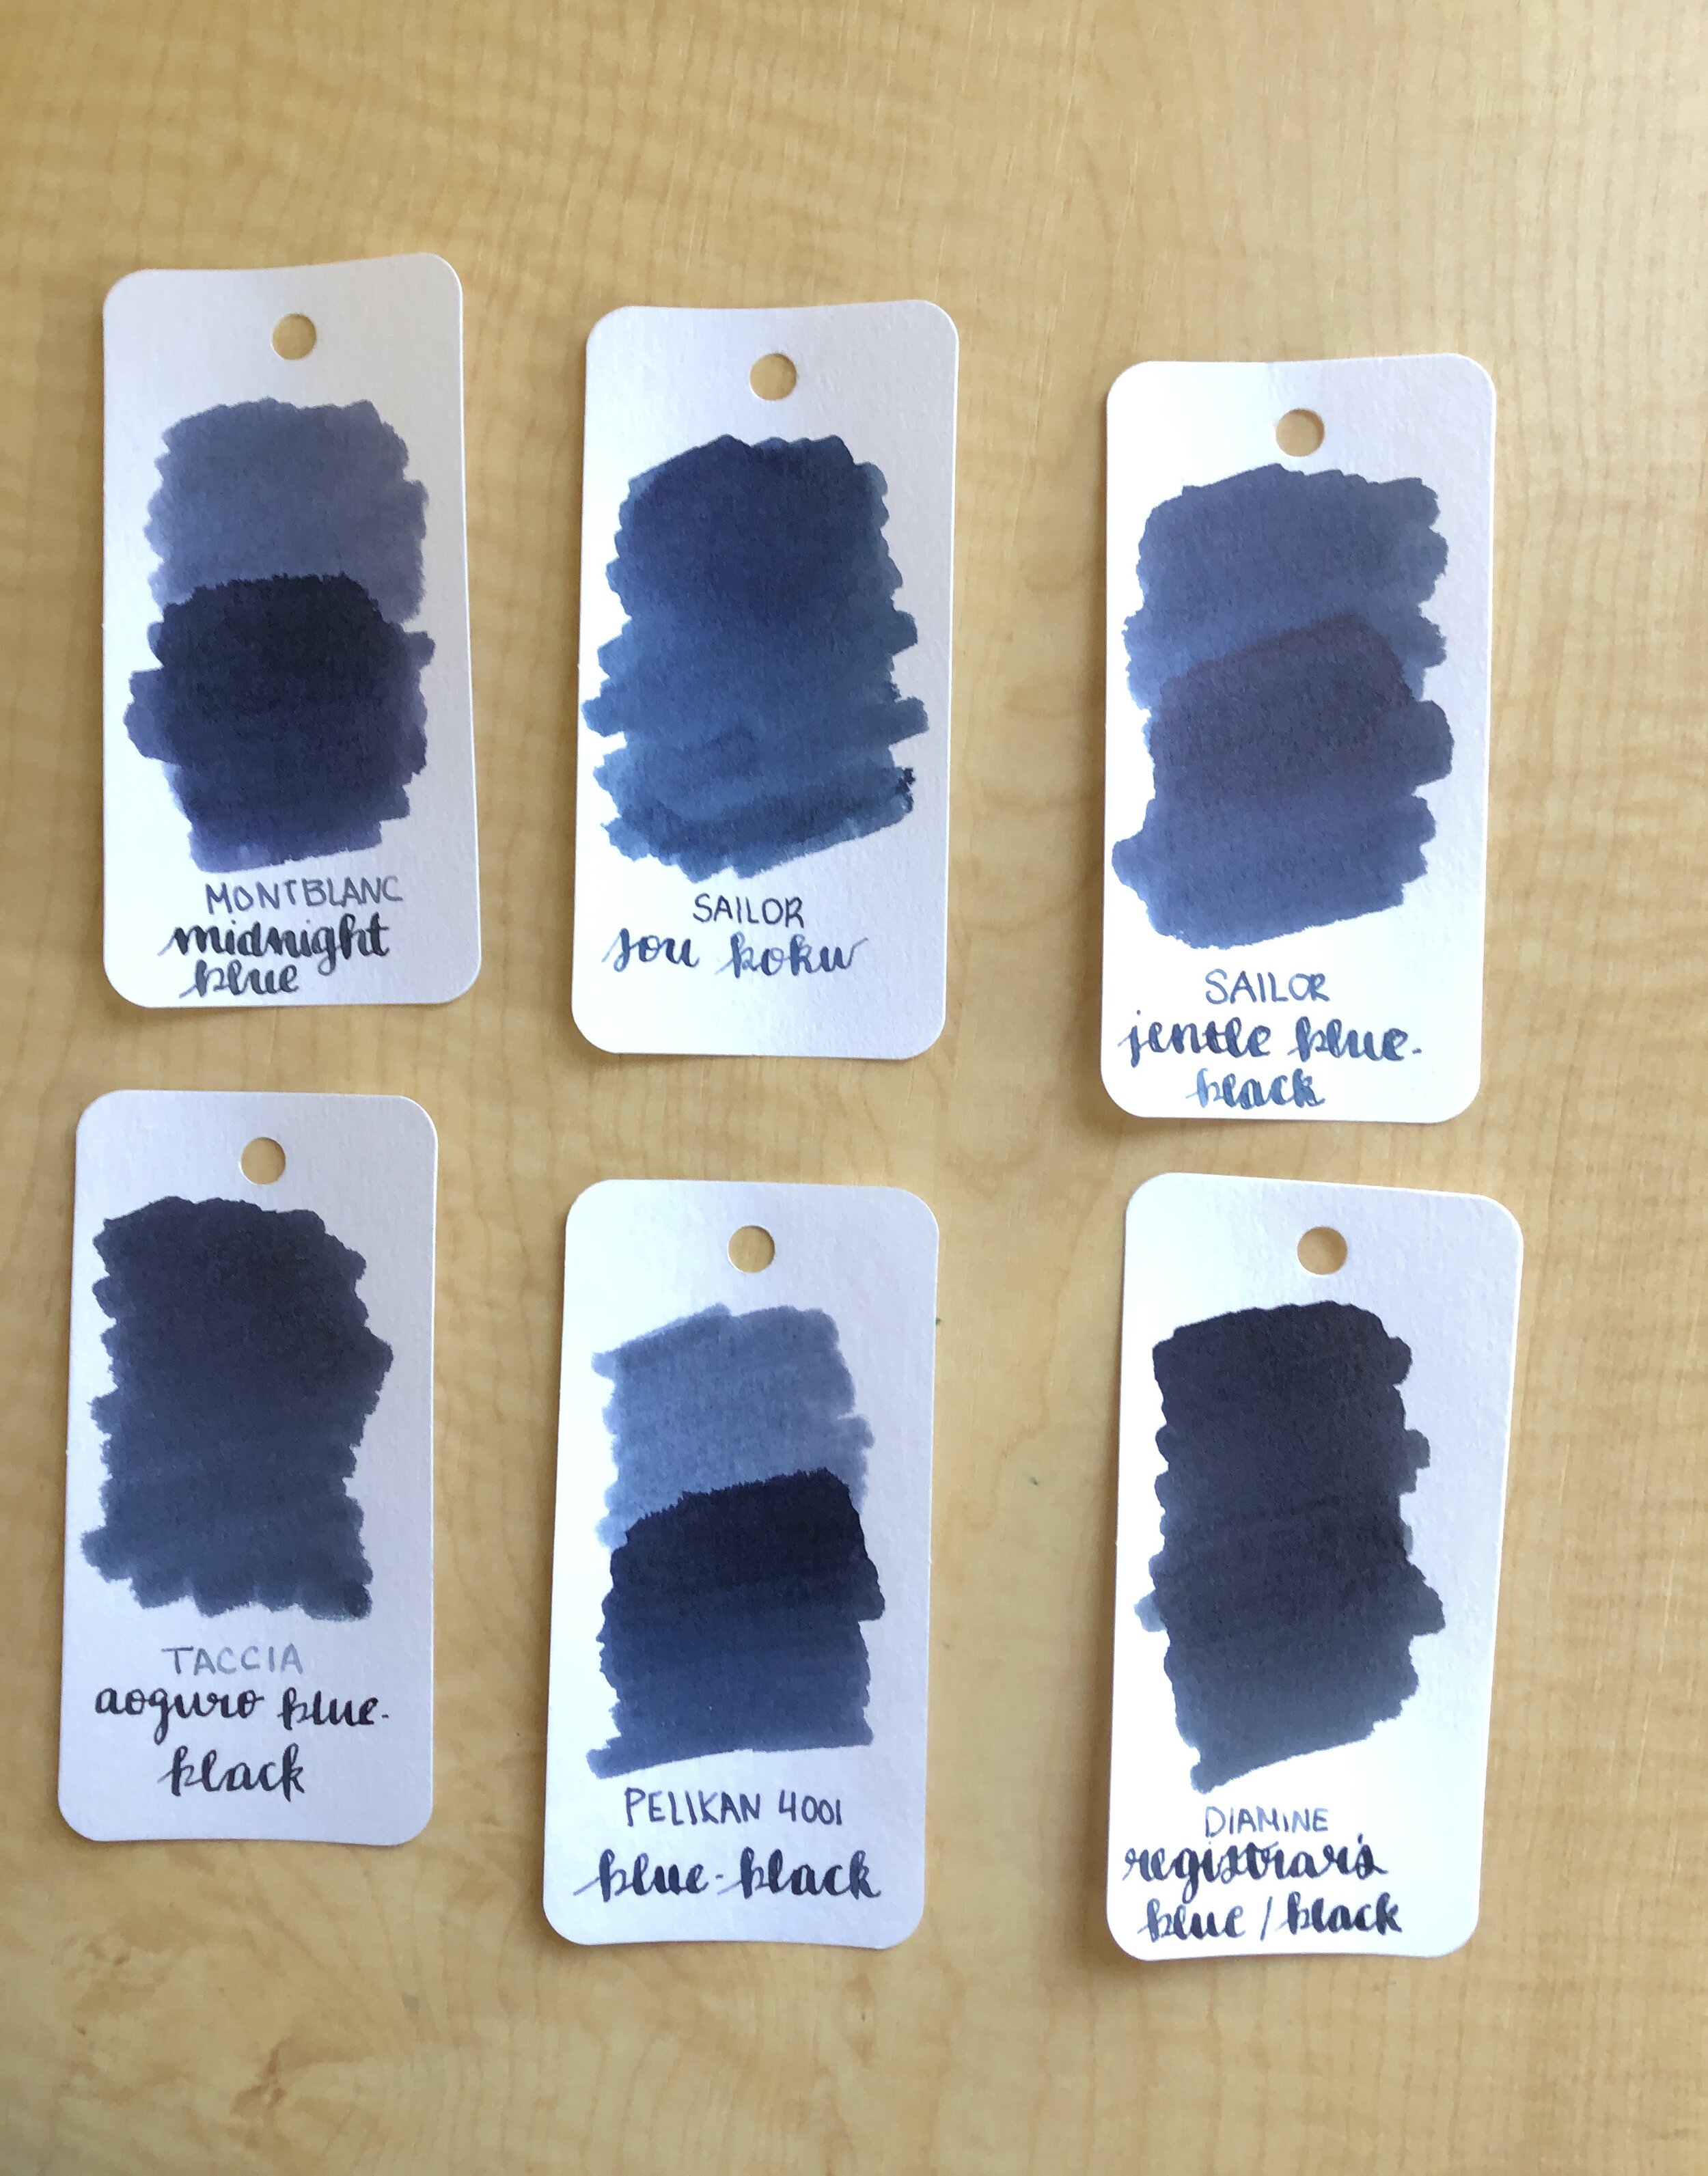 Blue Ink Or Black Ink: Which One Is Best?